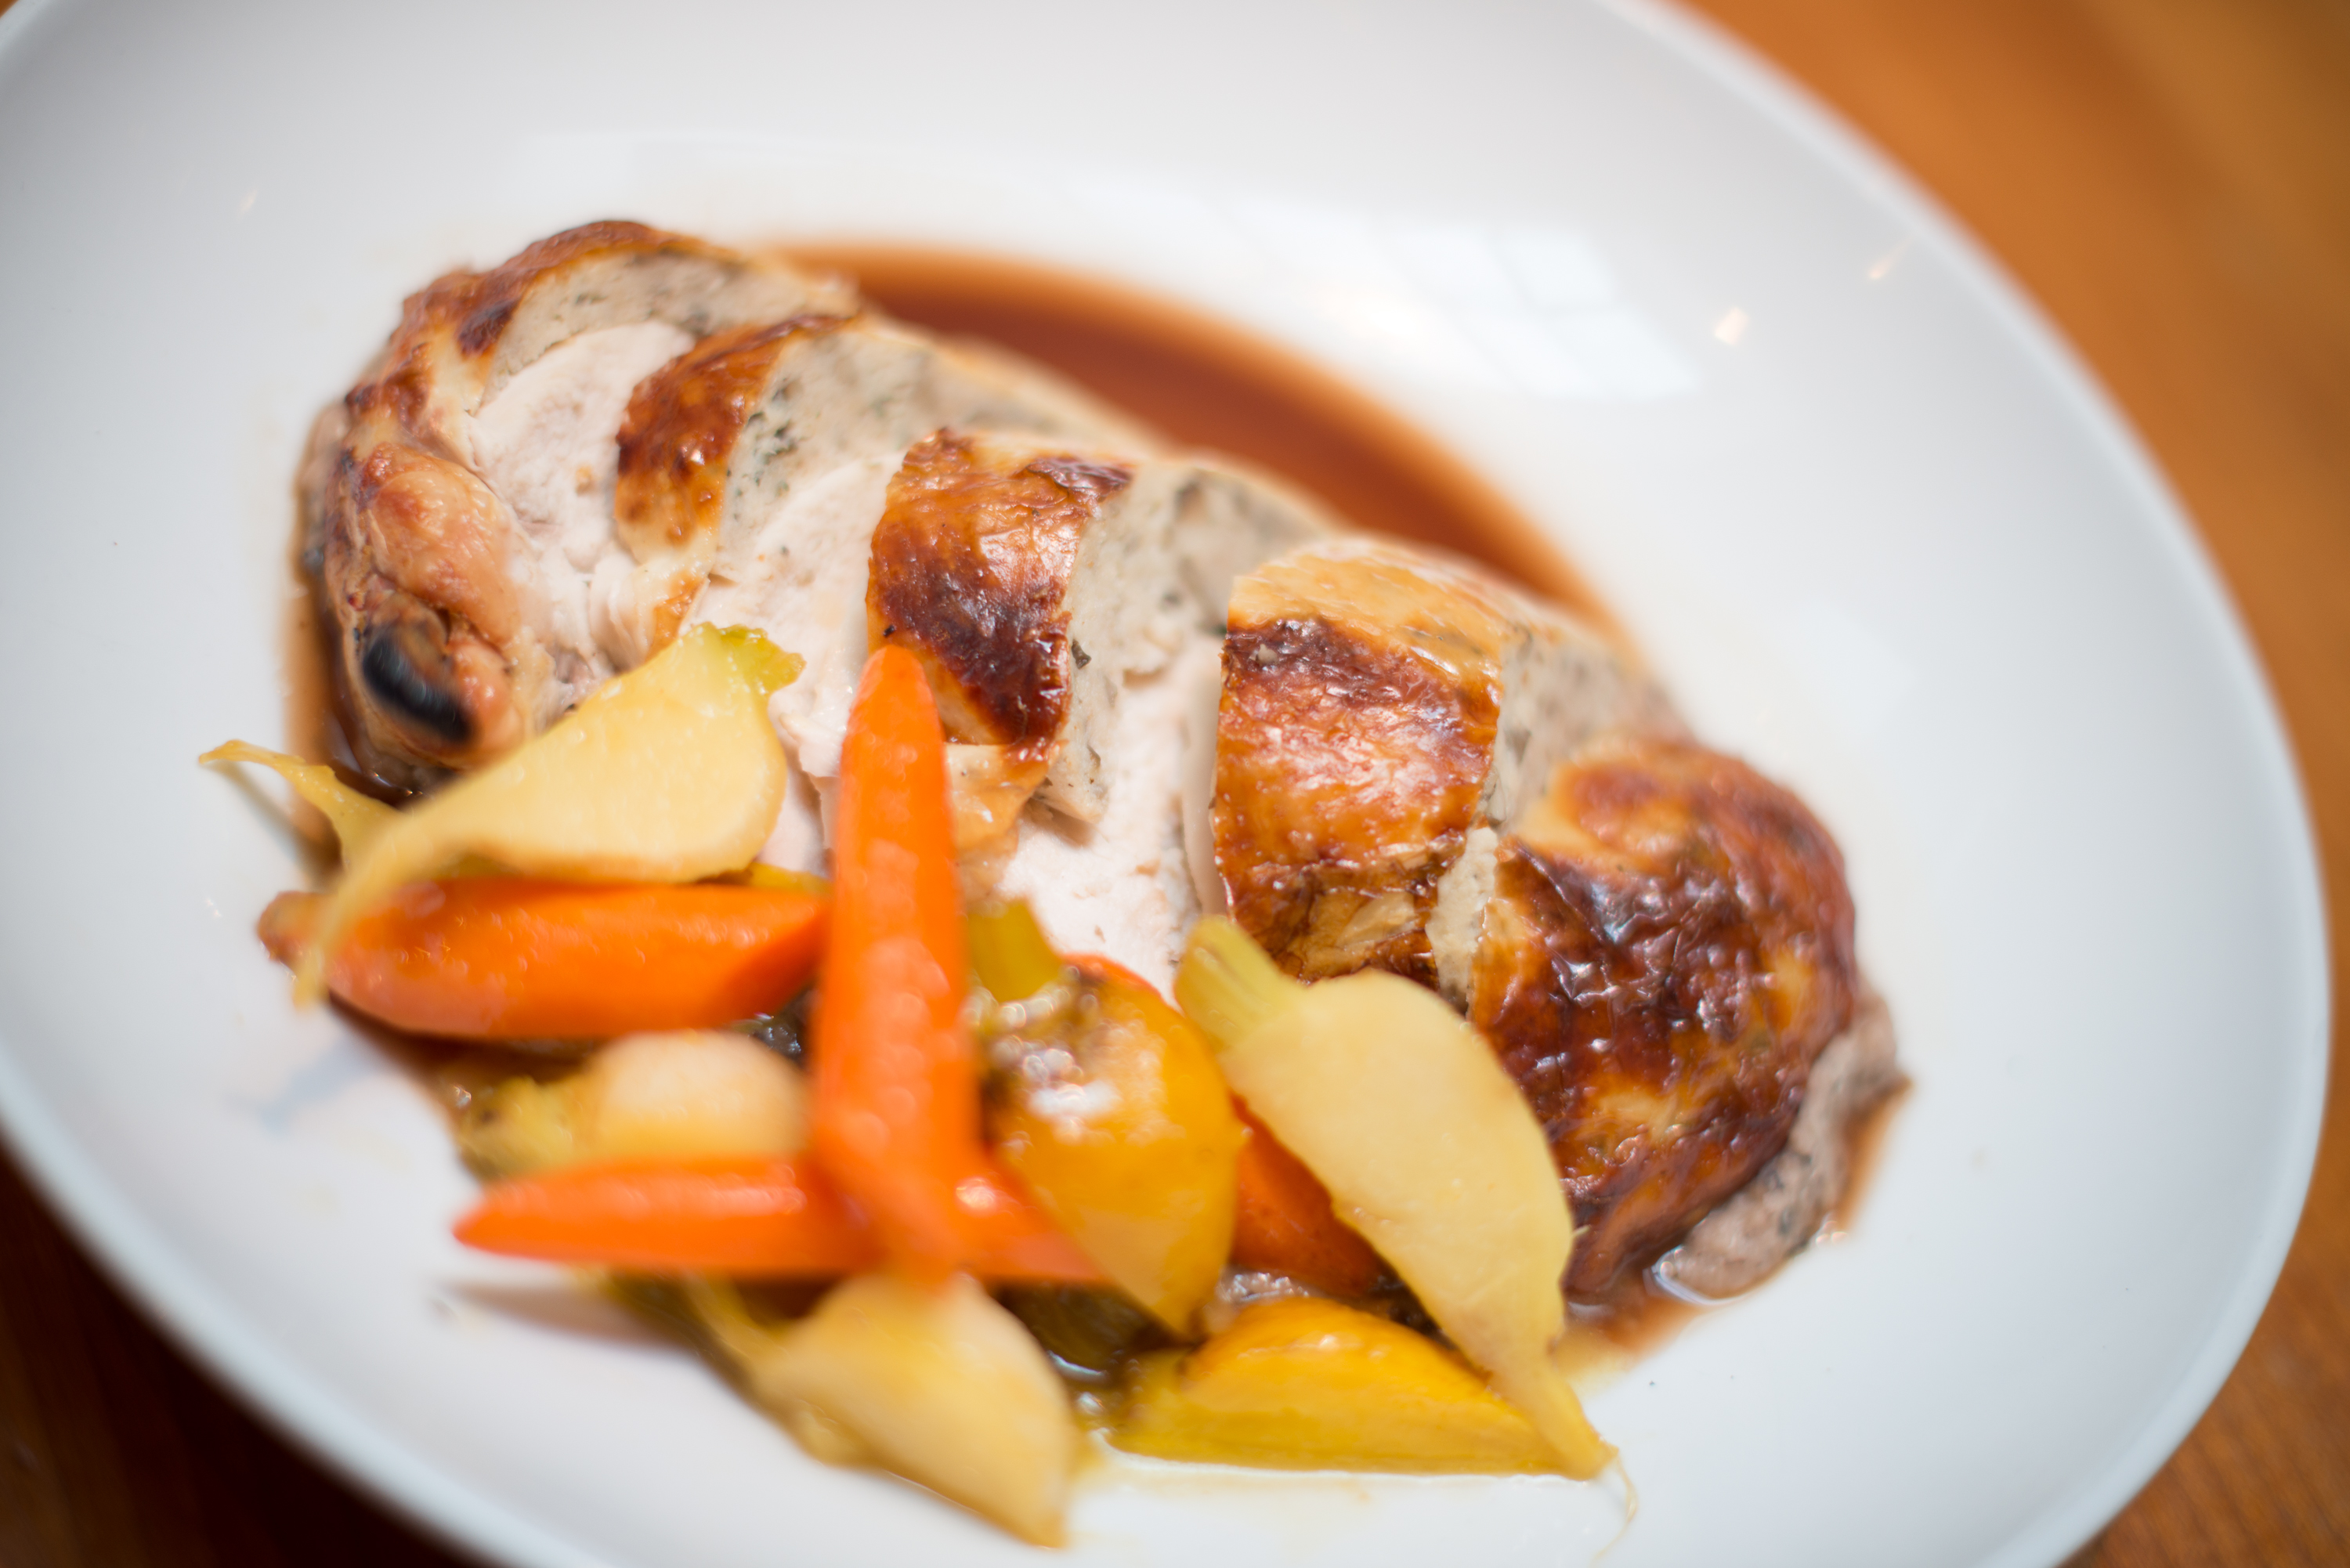 Among the Alexandria Restaurant Week choices at the Majestic Cafe is the twice roasted chicken. (Photo: Majestic Cafe)